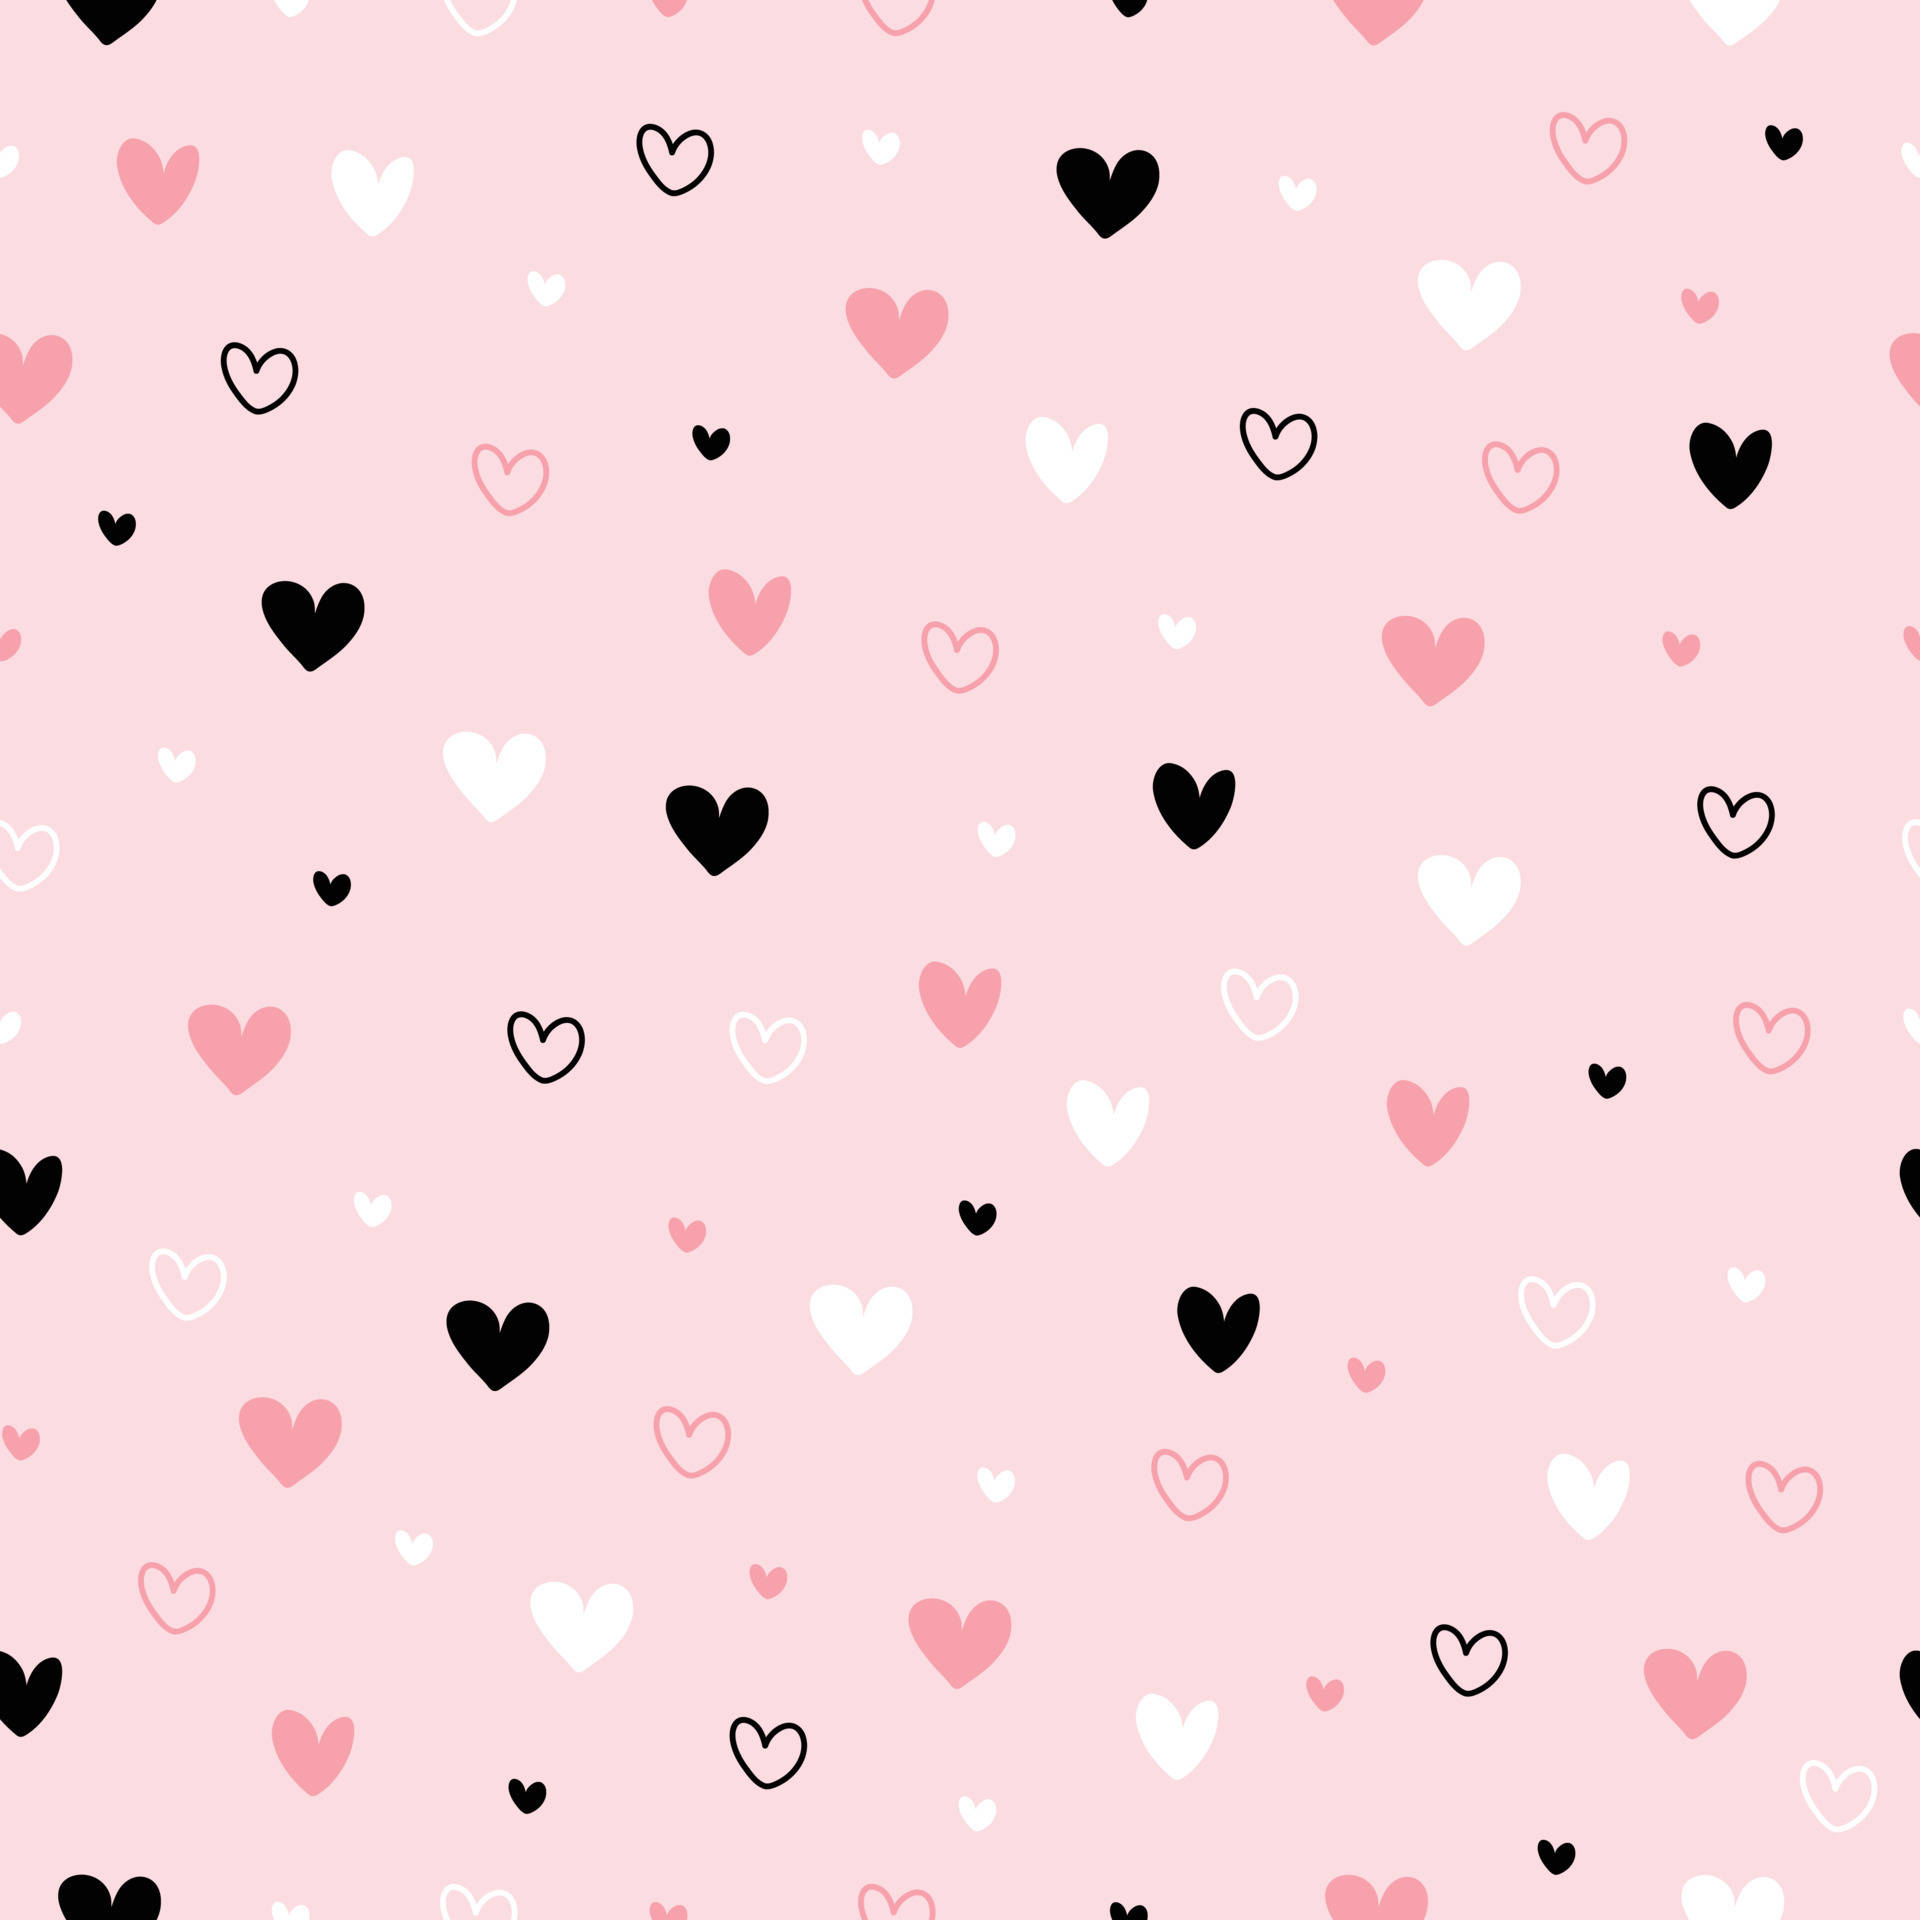 Love is in the Air this Valentines Day! Wallpaper